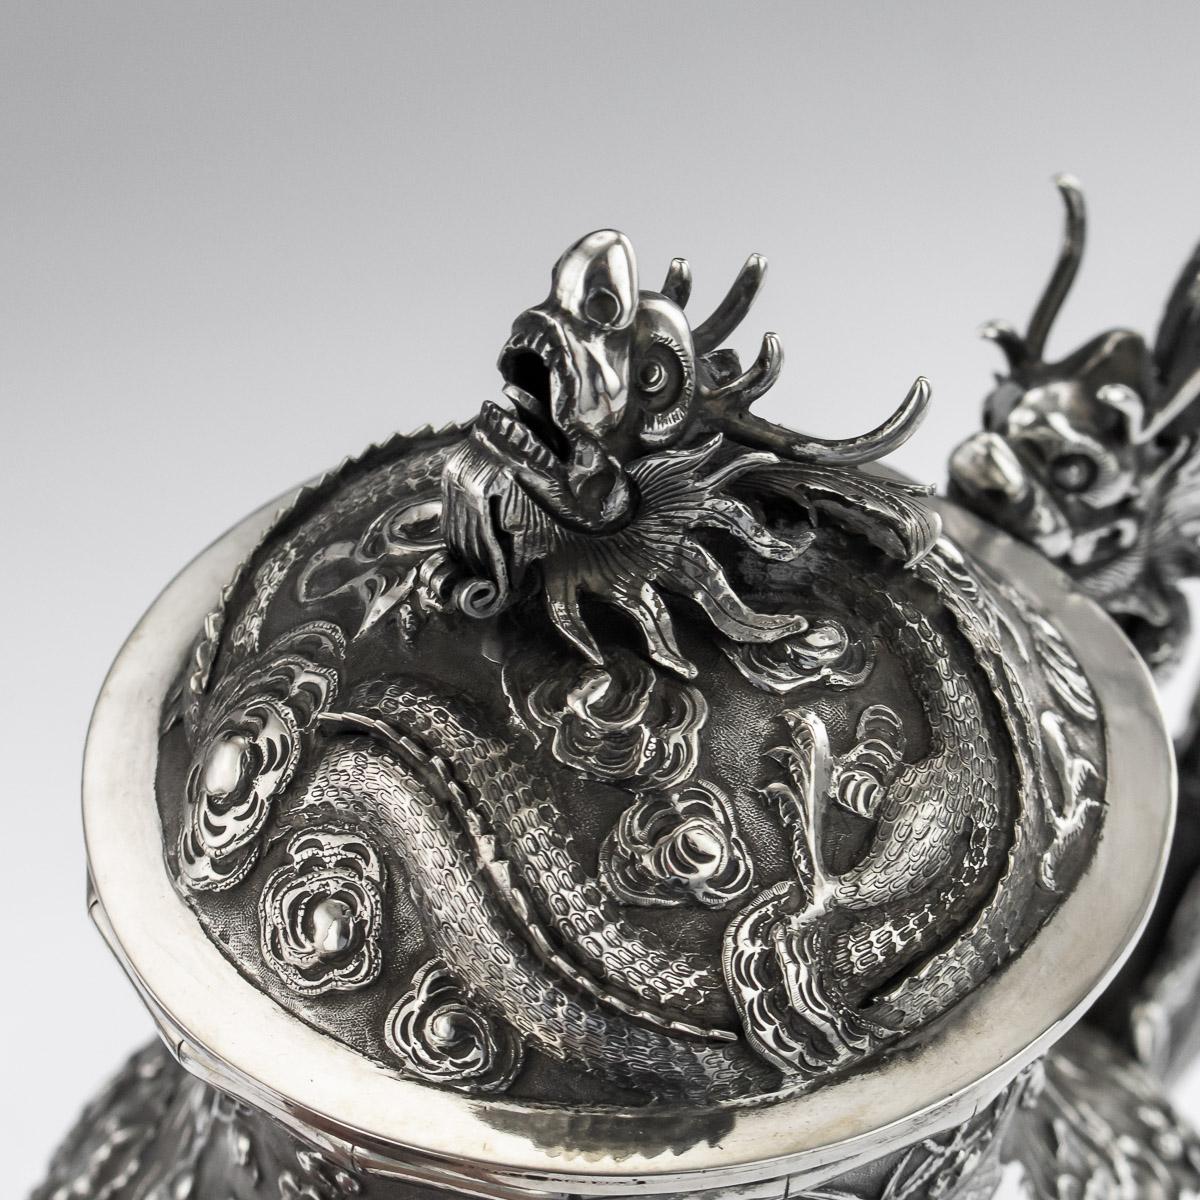 19th Century Chinese Export Solid Silver Tea Set, Woshing, Shanghai, c.1890 10